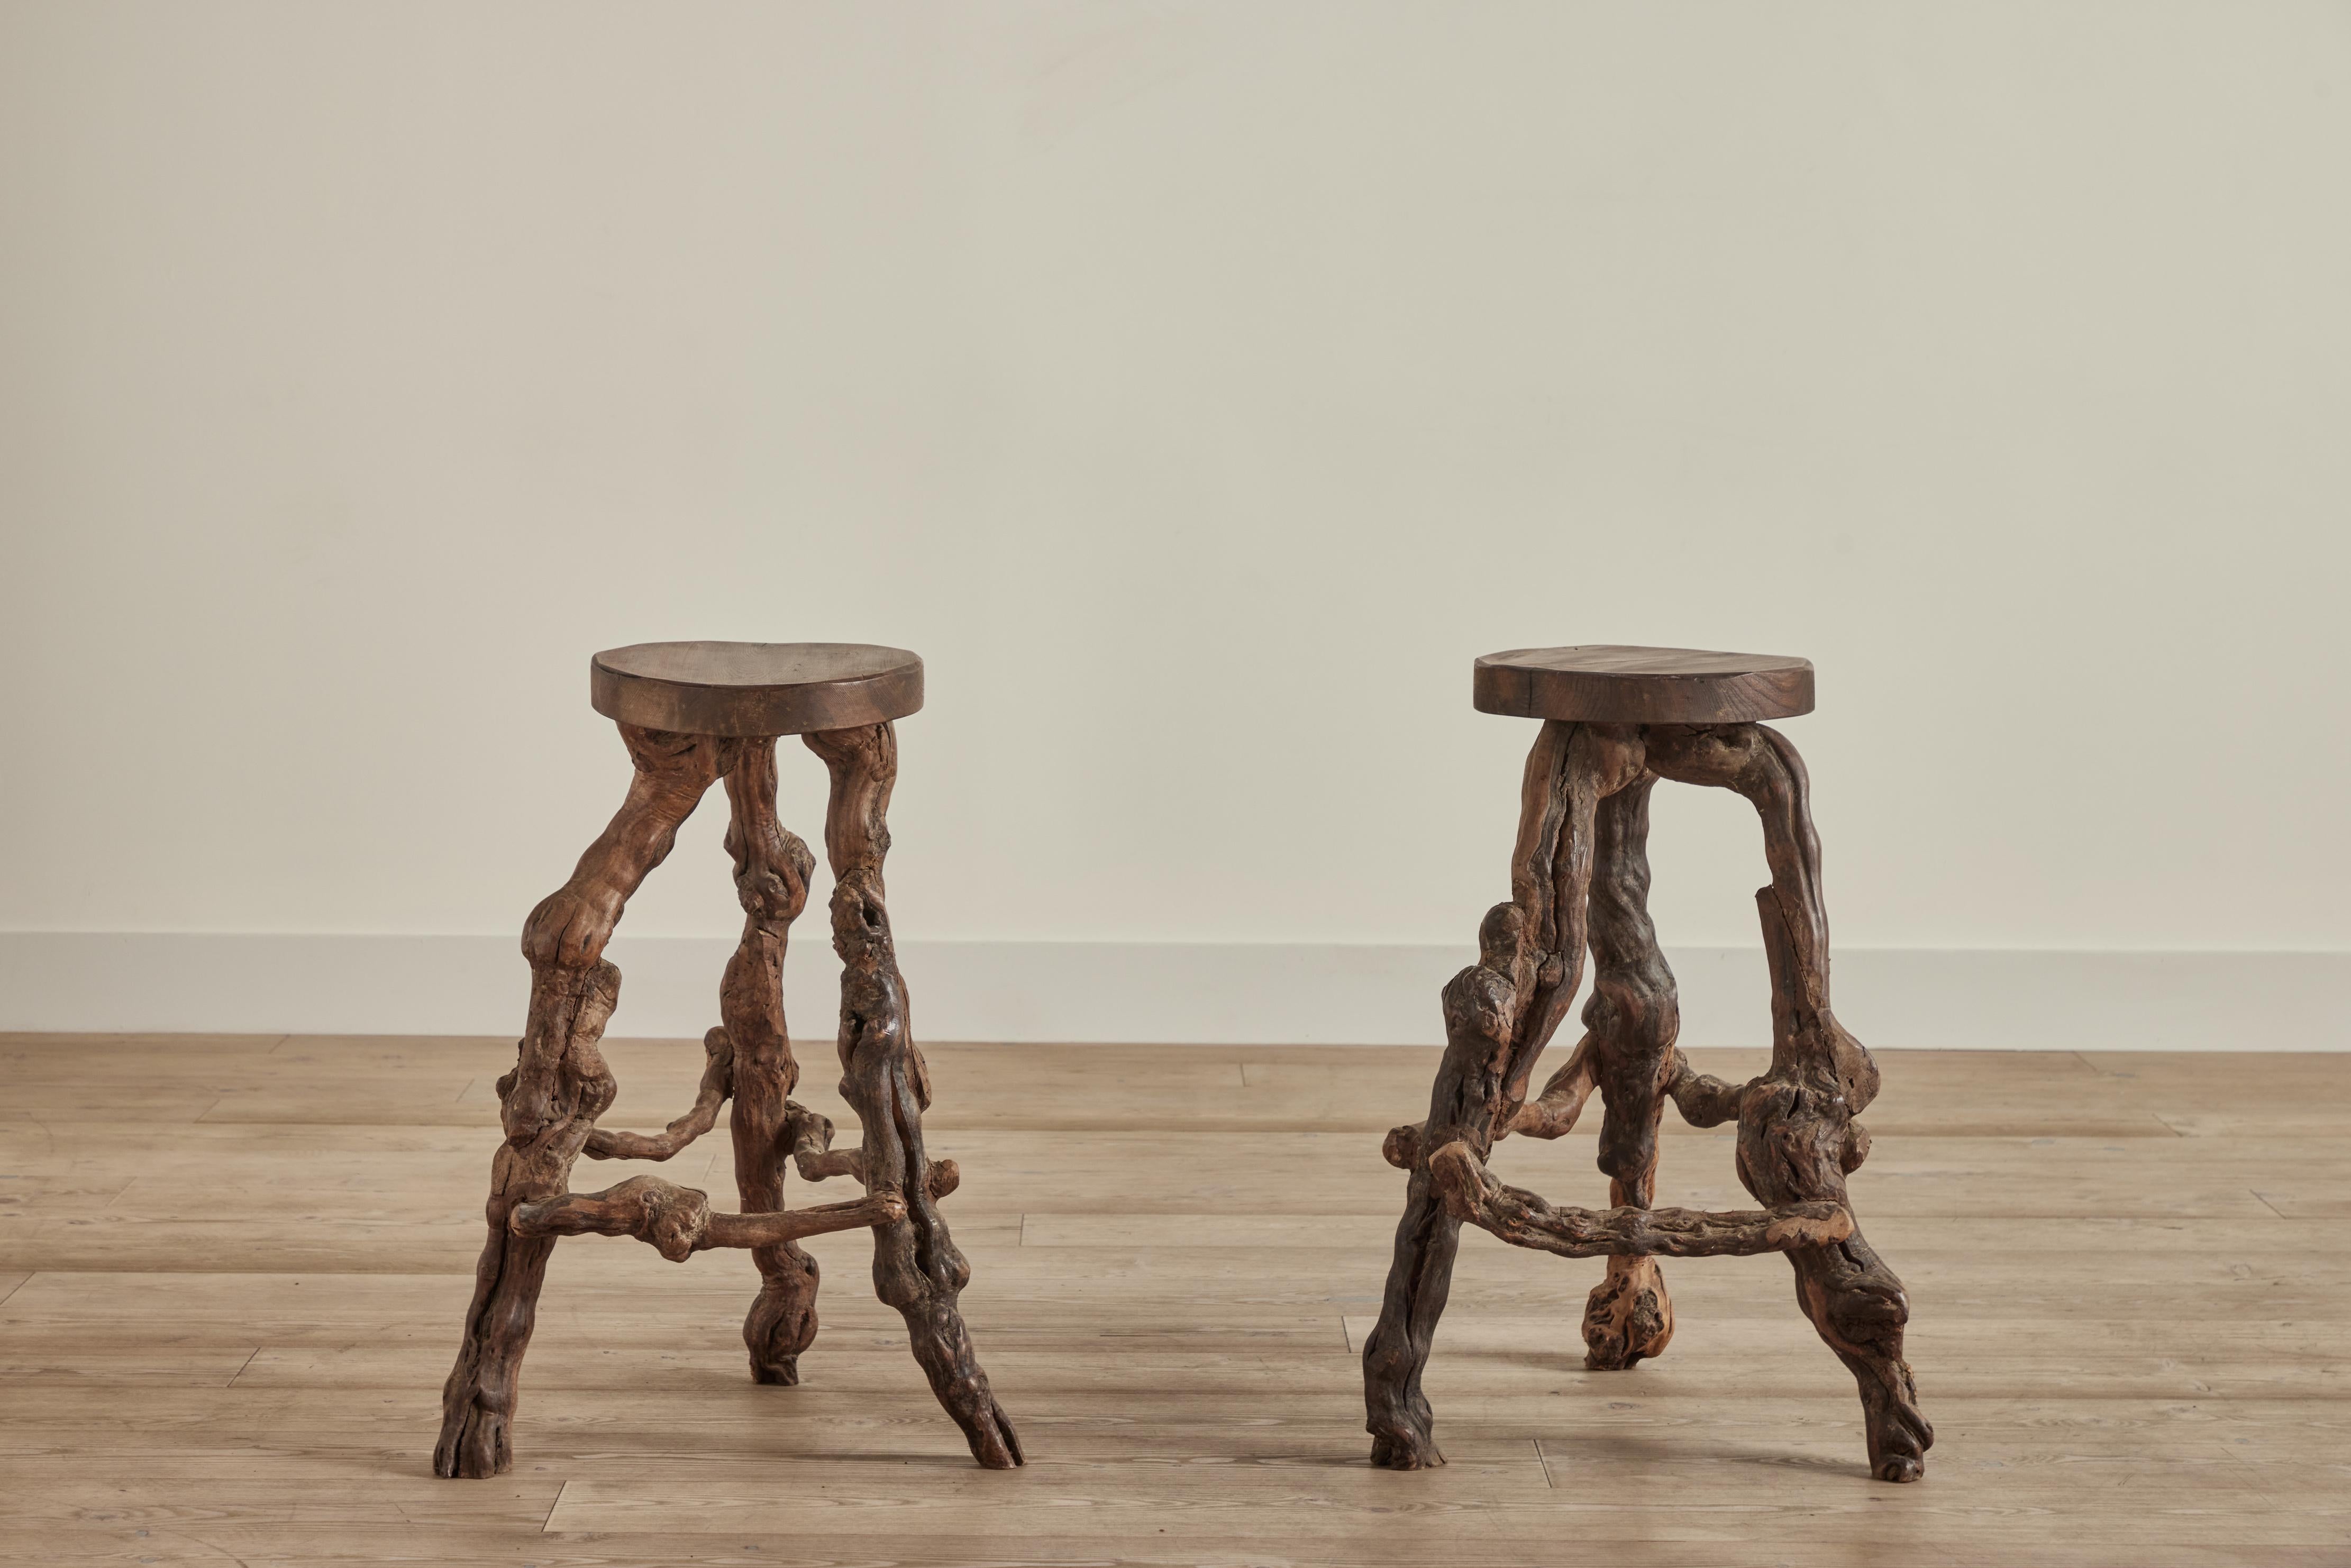 Pair of burled grapevine stools from France circa 1940. Wear on wood is consistent with age and use. Size of each stool varies slightly due to handmade nature. 